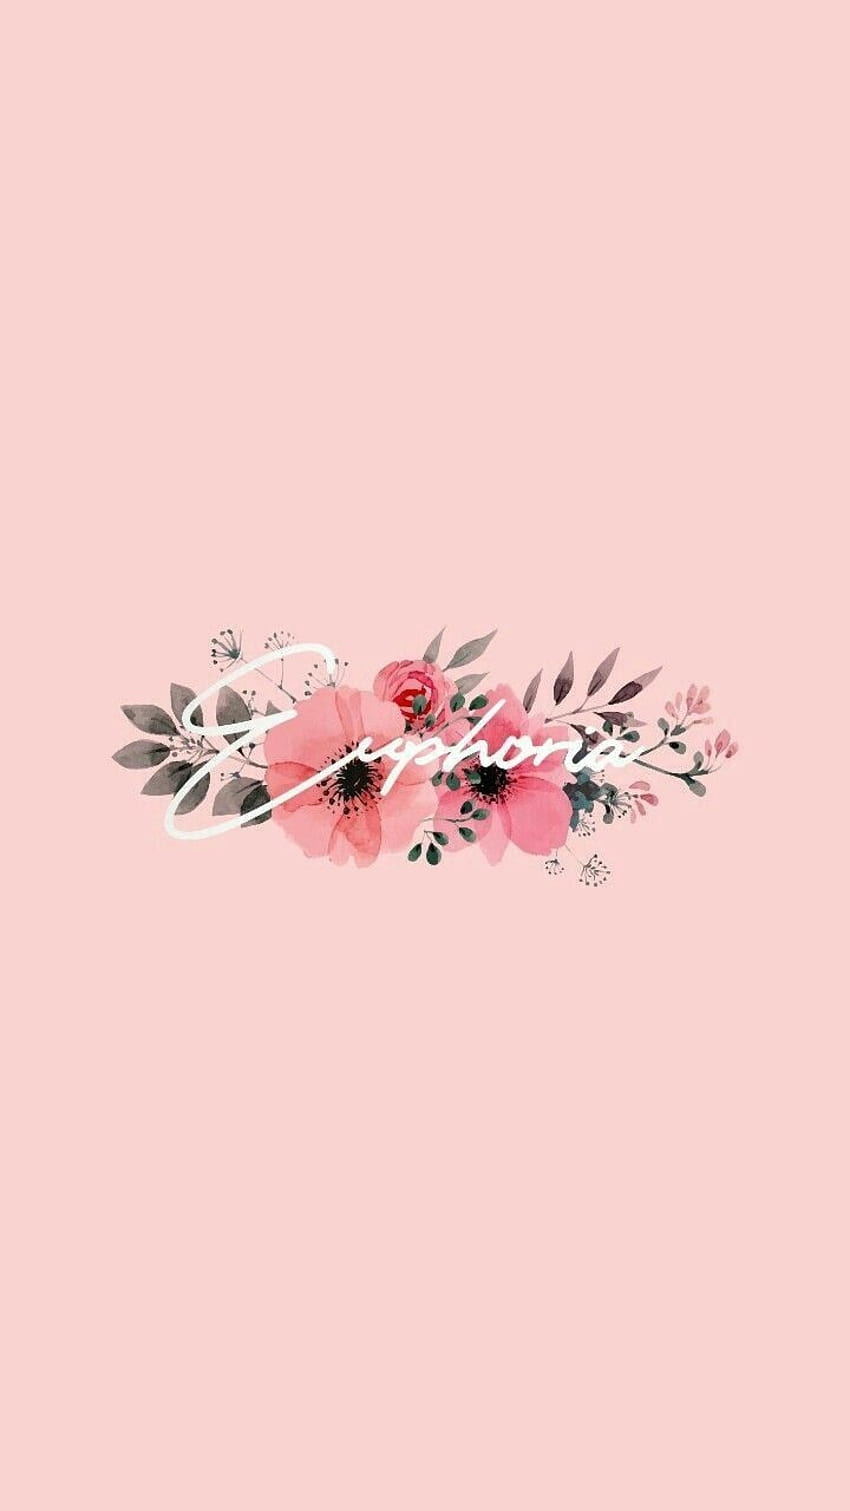 Wallpaper phone, pink background, flowers in the middle, phone wallpaper, spring background - Minimalist